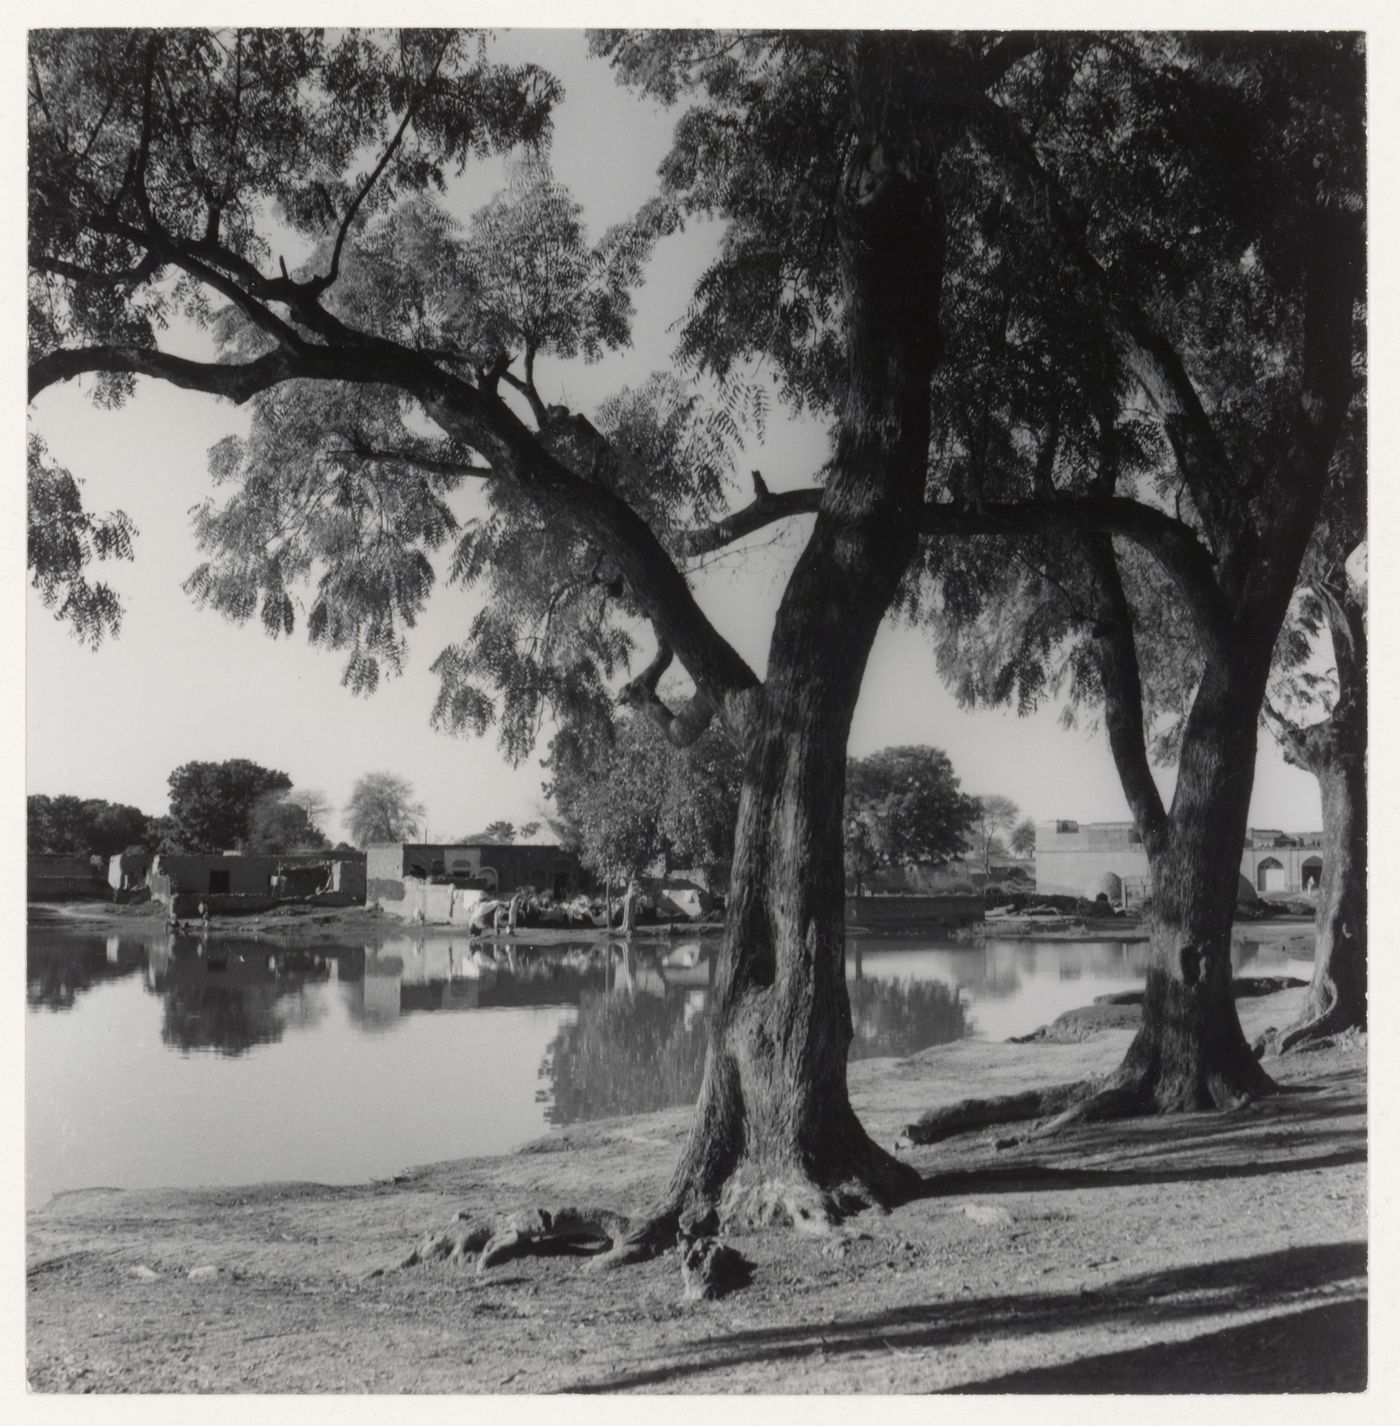 Unidentified view of a landscape with houses in the background in the area of Chandigarh, India